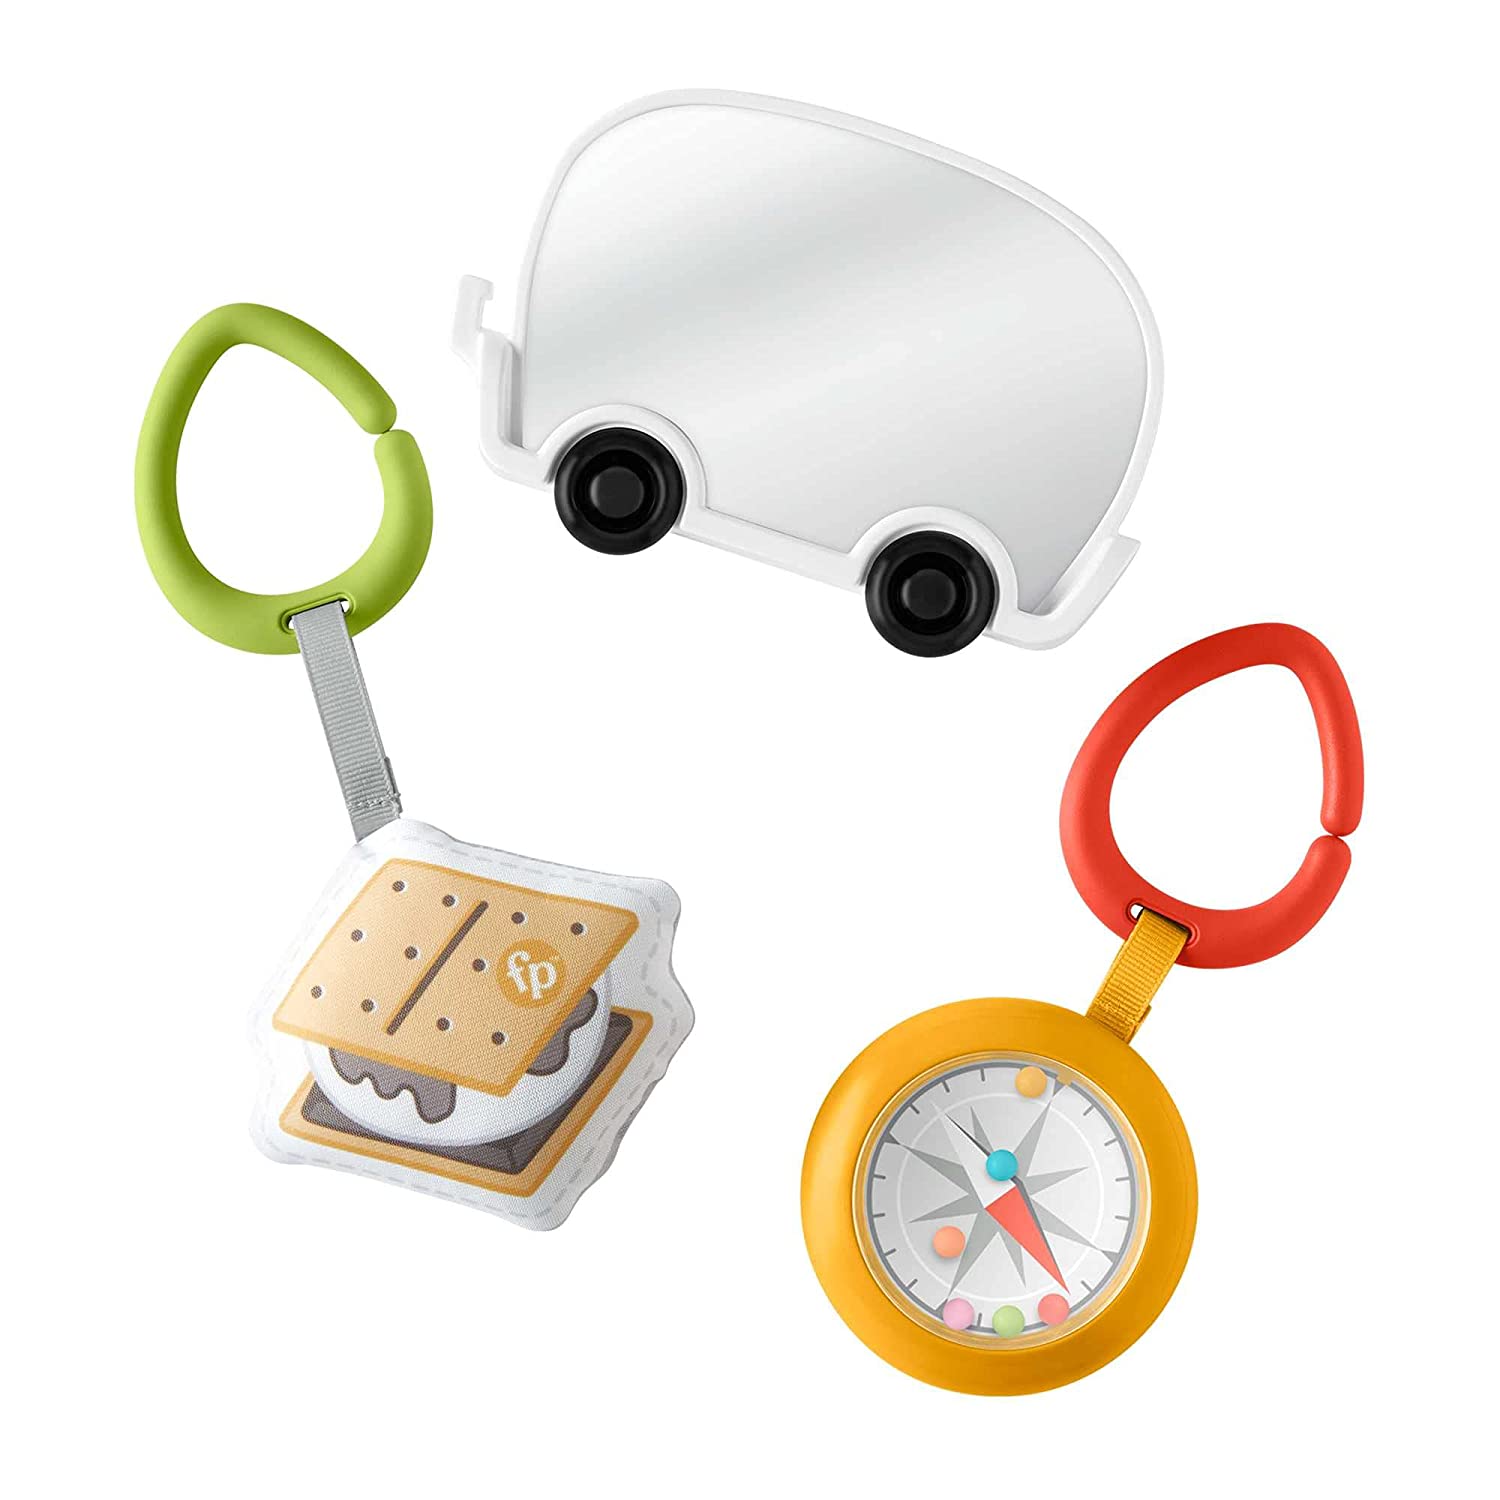 Fisher-Price S'More Fun Camping Gift Set - Compass toy with fun, rattling beads